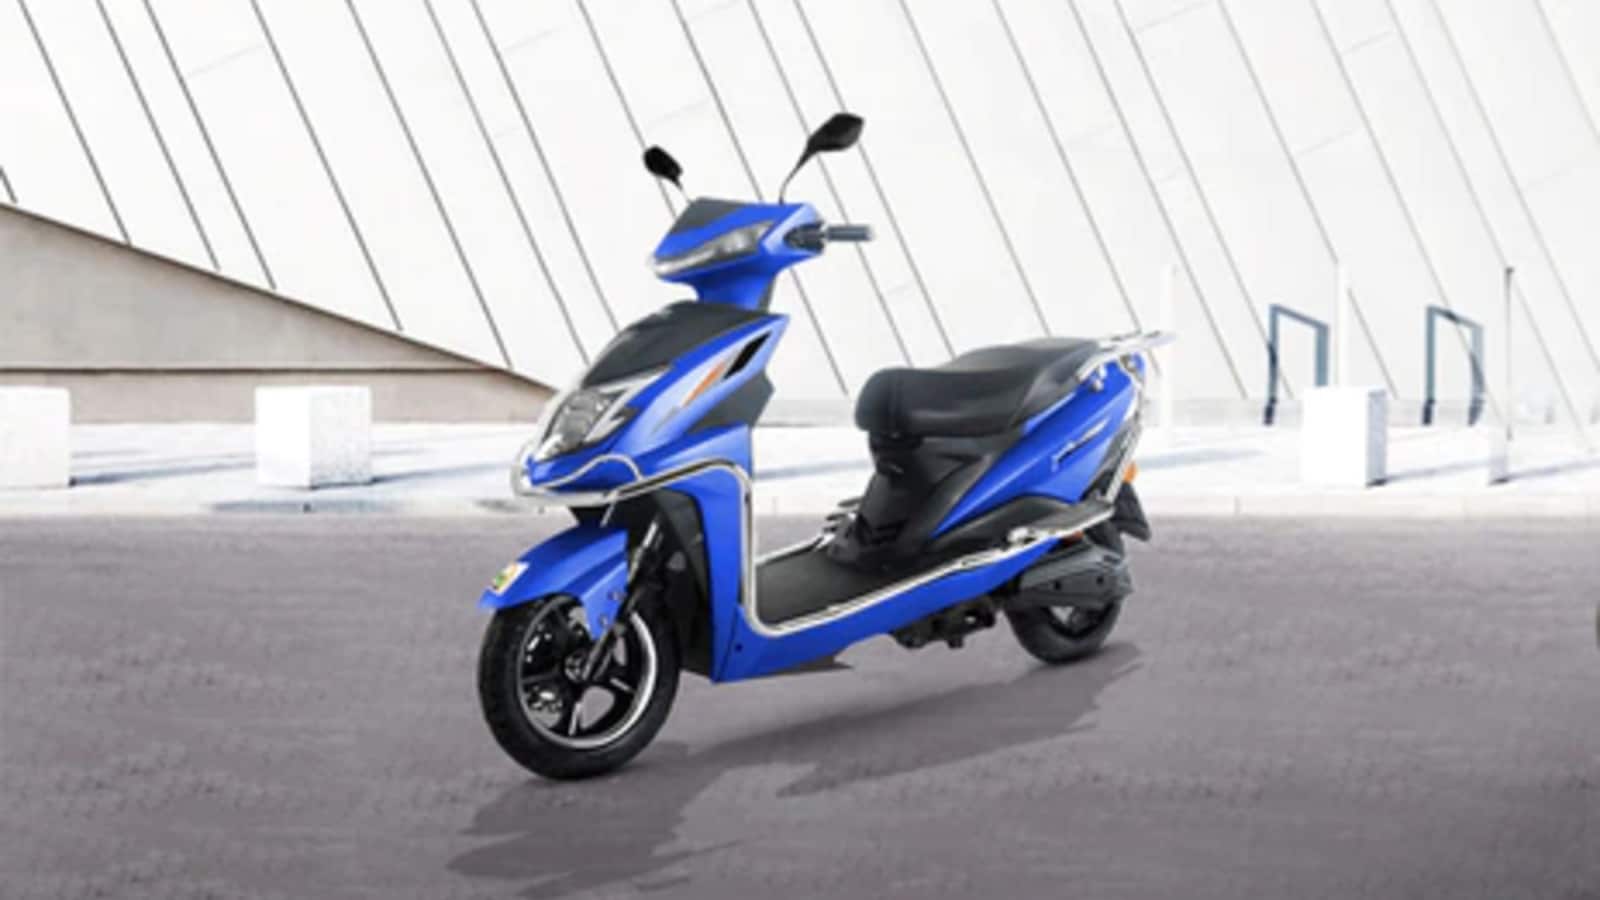 AMO Jaunty Plus Electric Scooter Launched in India, Priced at Rs 1.10 Lakh